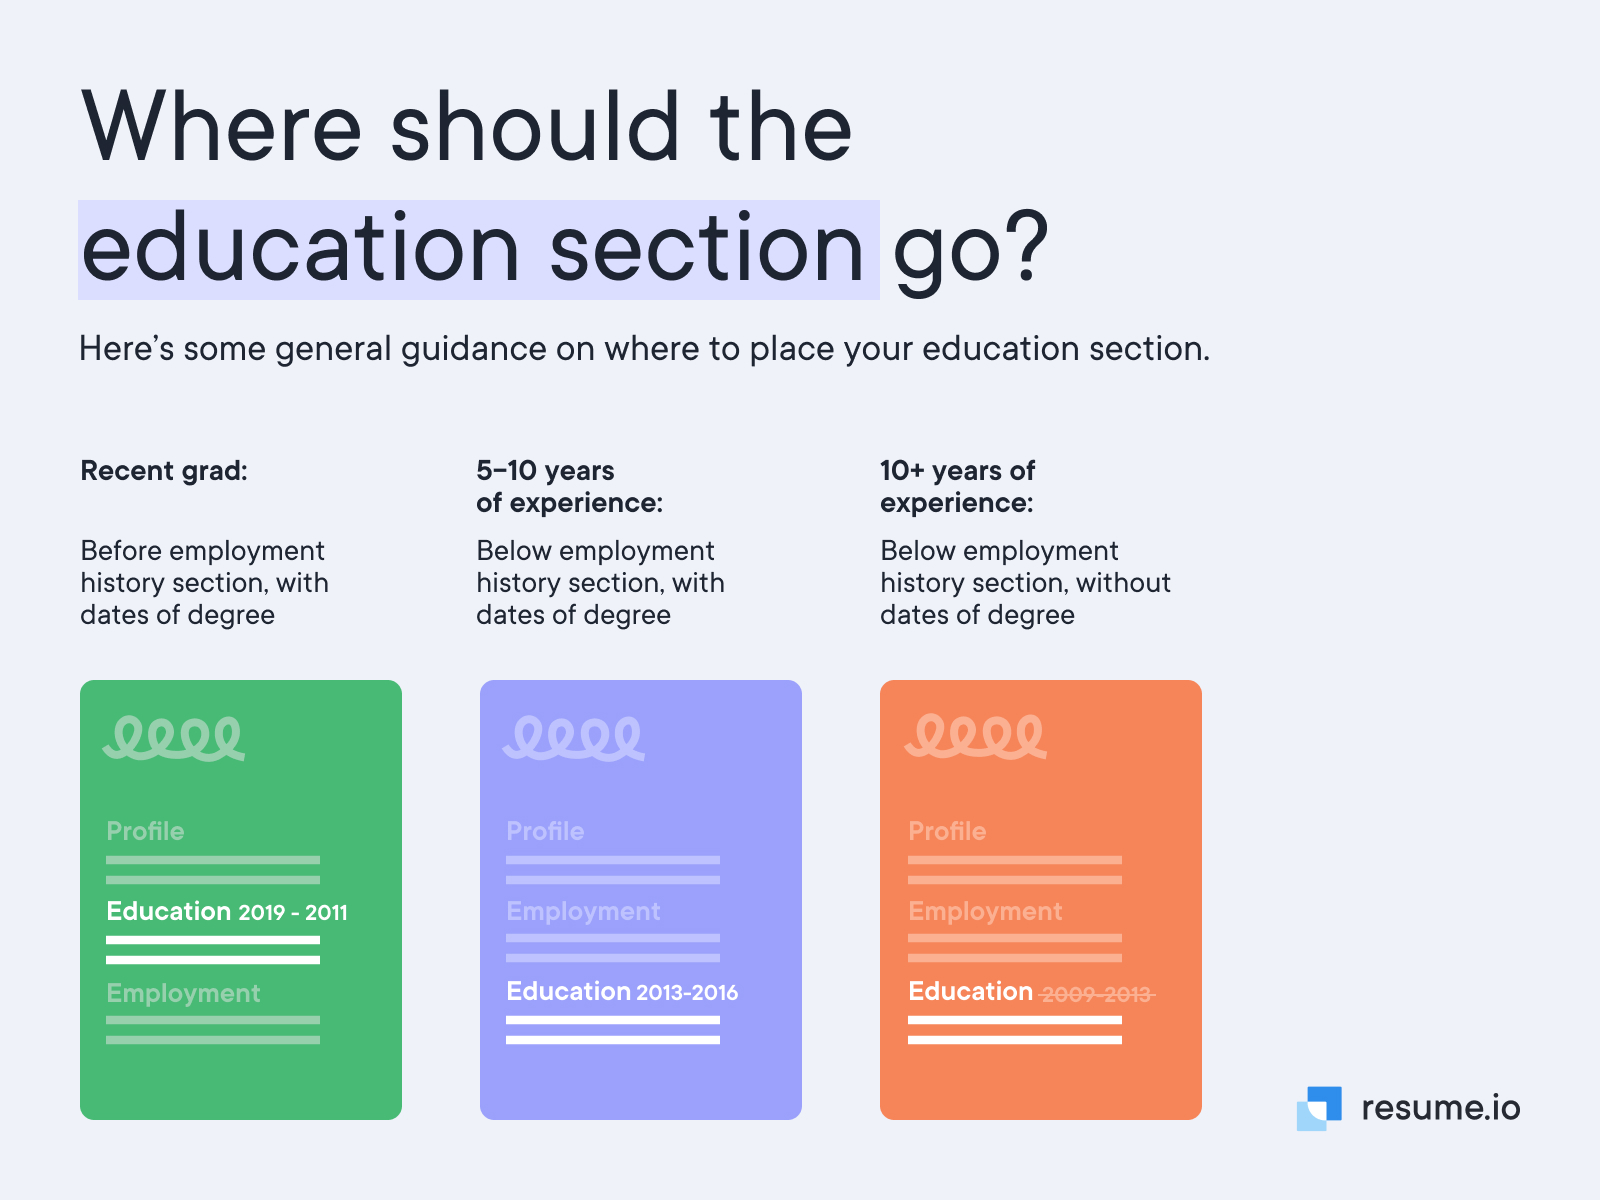 Where should the education section go?